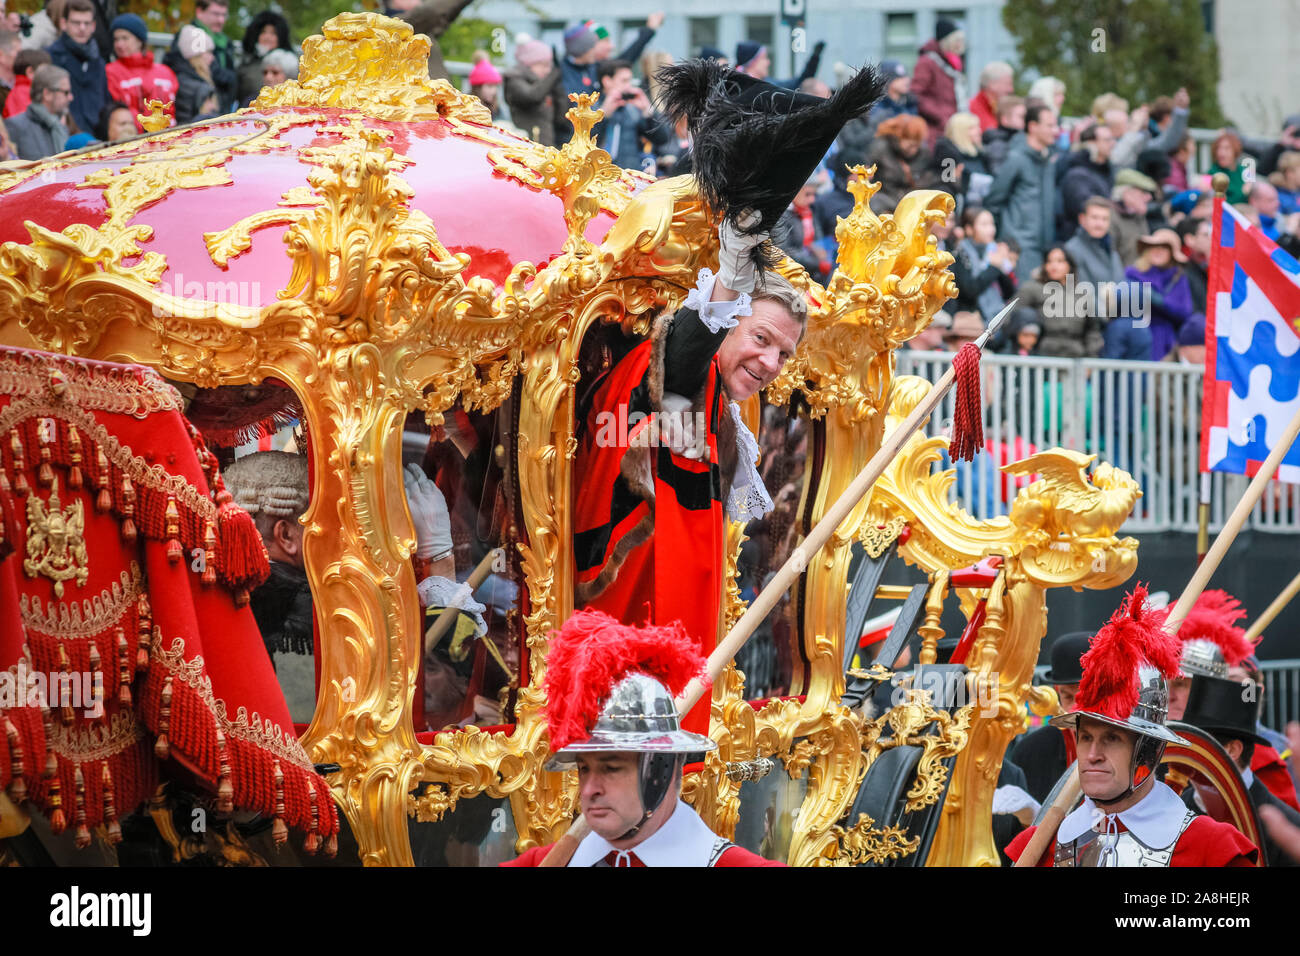 City of London, London, UK, 09th November 2019.  The 692nd Lord Mayor of London, Alderman William Russell, waves from the golden State Coach at St Paul's as the crowds cheer on the parade. The annual Lord Mayor's Show, a parade through the City of London that is 804 years old and this year features over 6000 participants, sees marching bands, military detachments, carriages, dance troupes, inflatables and many others make their way from Mansion House, via St Paul's to the Royal Courts of Justice. Credit: Imageplotter/Alamy Live News Credit: Imageplotter/Alamy Live News Stock Photo